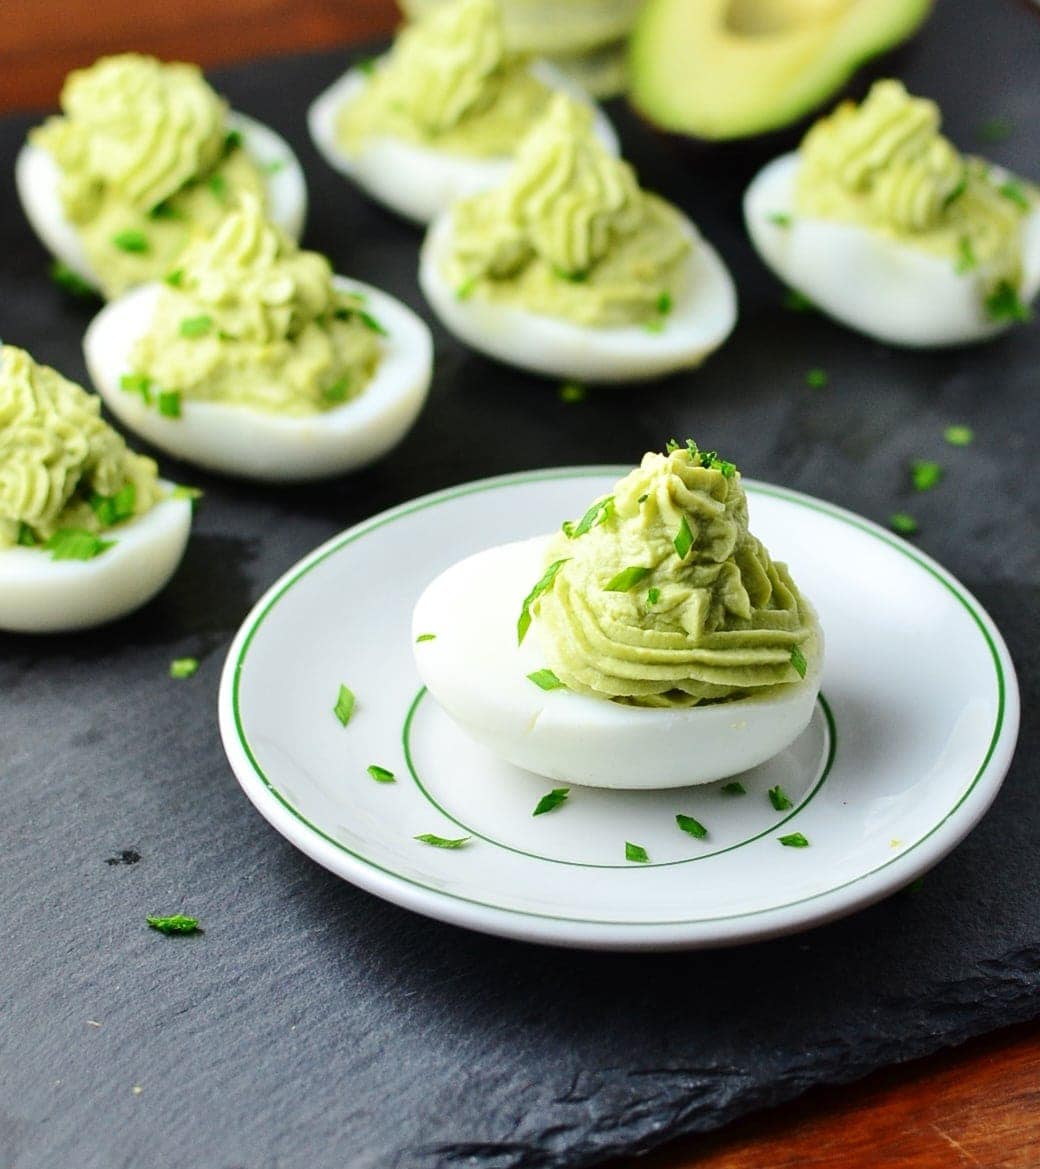 Deviled eggs with avocado and garnish of chives on white plate on top of grey surface.